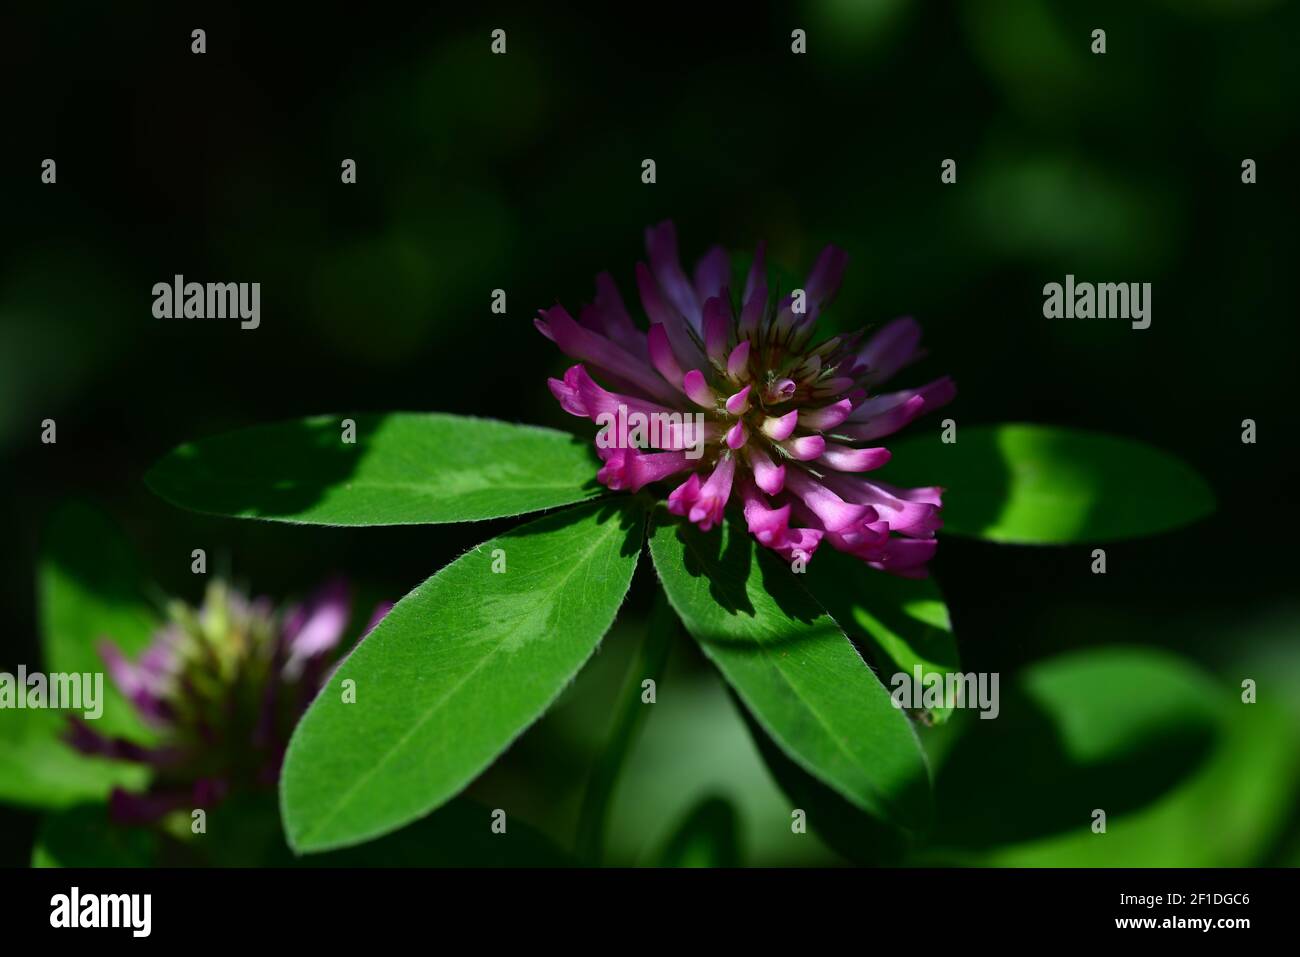 A purple-white clover flower emerges from the shadows. Green leaves and a beautiful colorful flower lit by the sun. The plant half-hidden in the shade Stock Photo